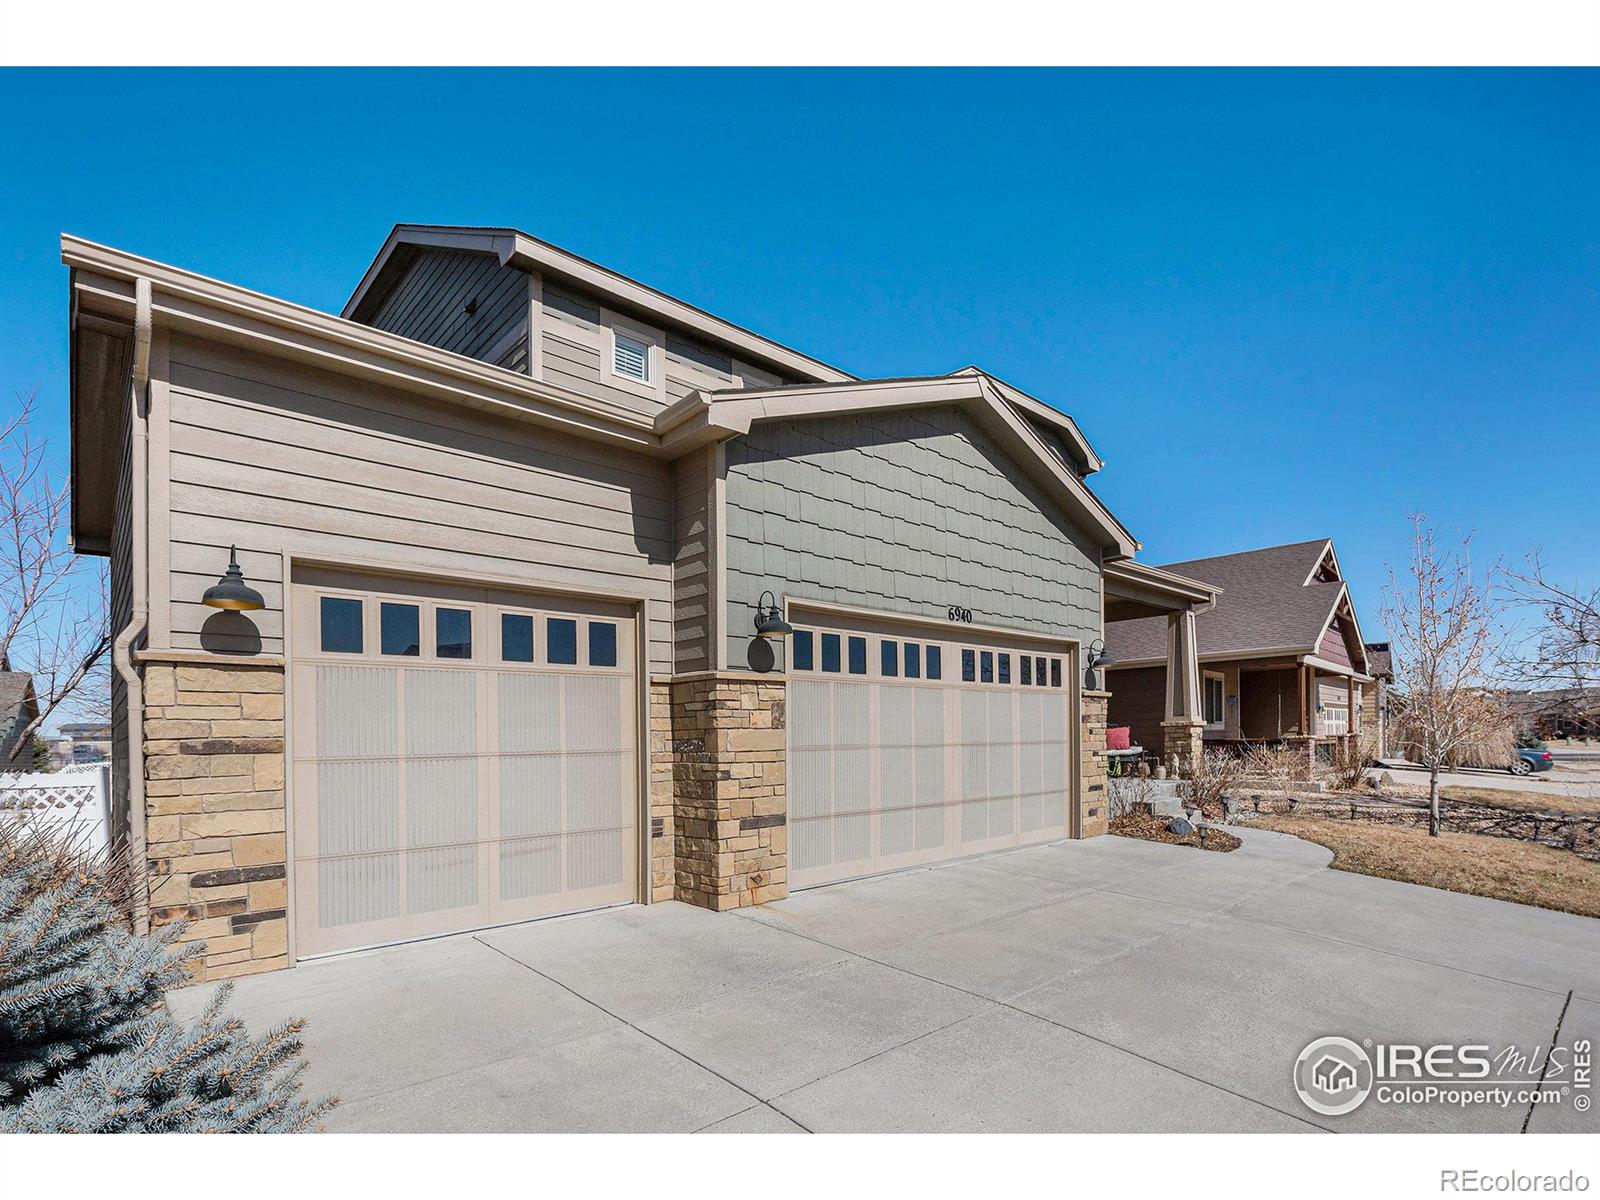 Report Image for 6940  Fireside Drive,Timnath, Colorado